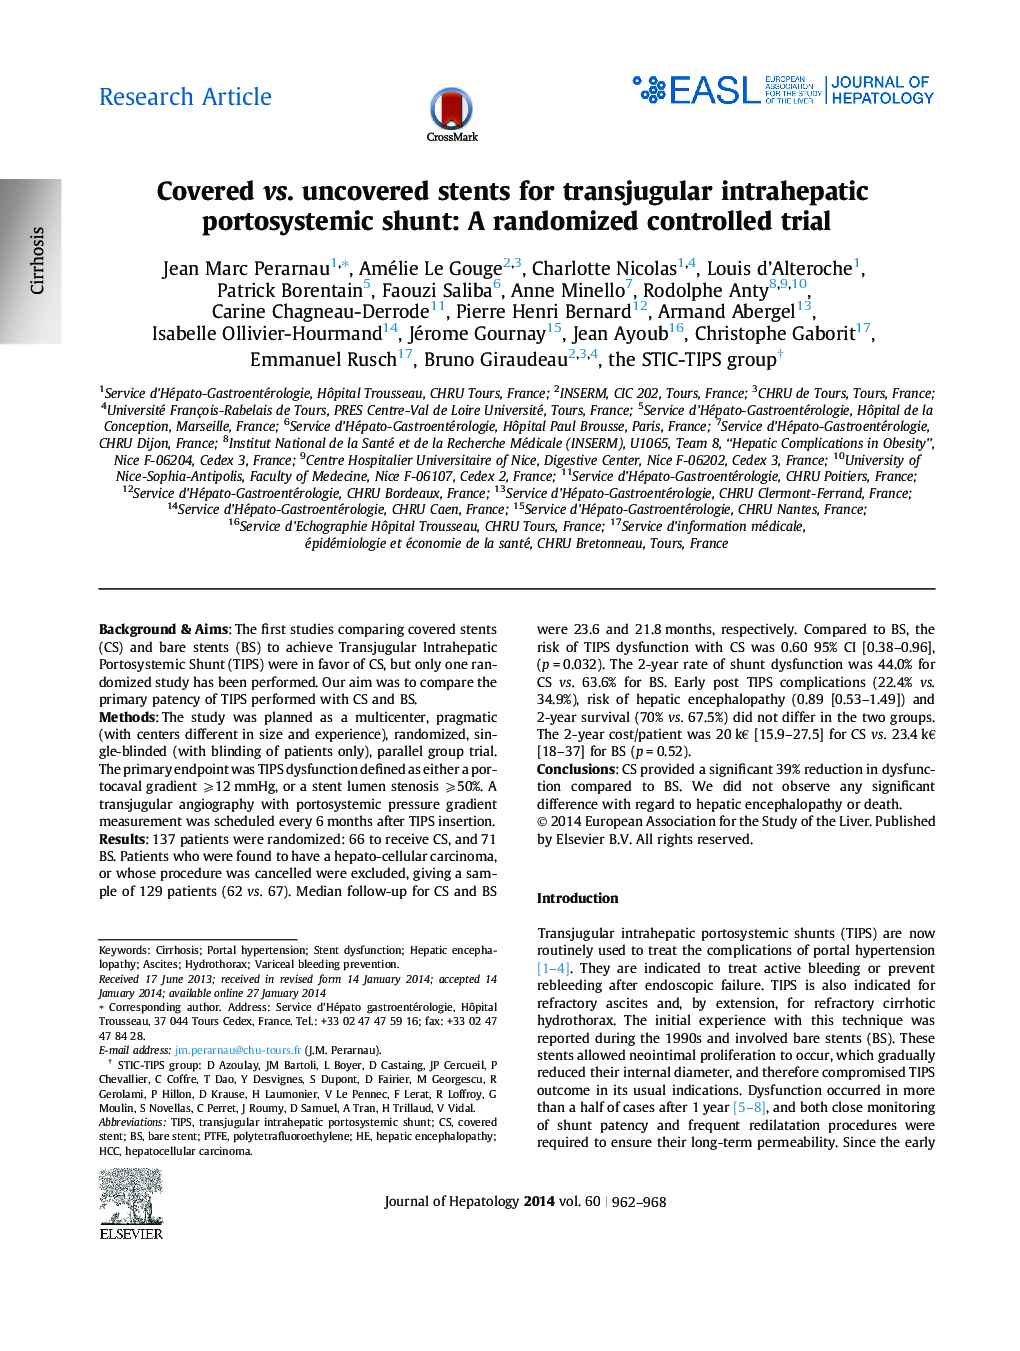 Research ArticleCovered vs. uncovered stents for transjugular intrahepatic portosystemic shunt: A randomized controlled trial